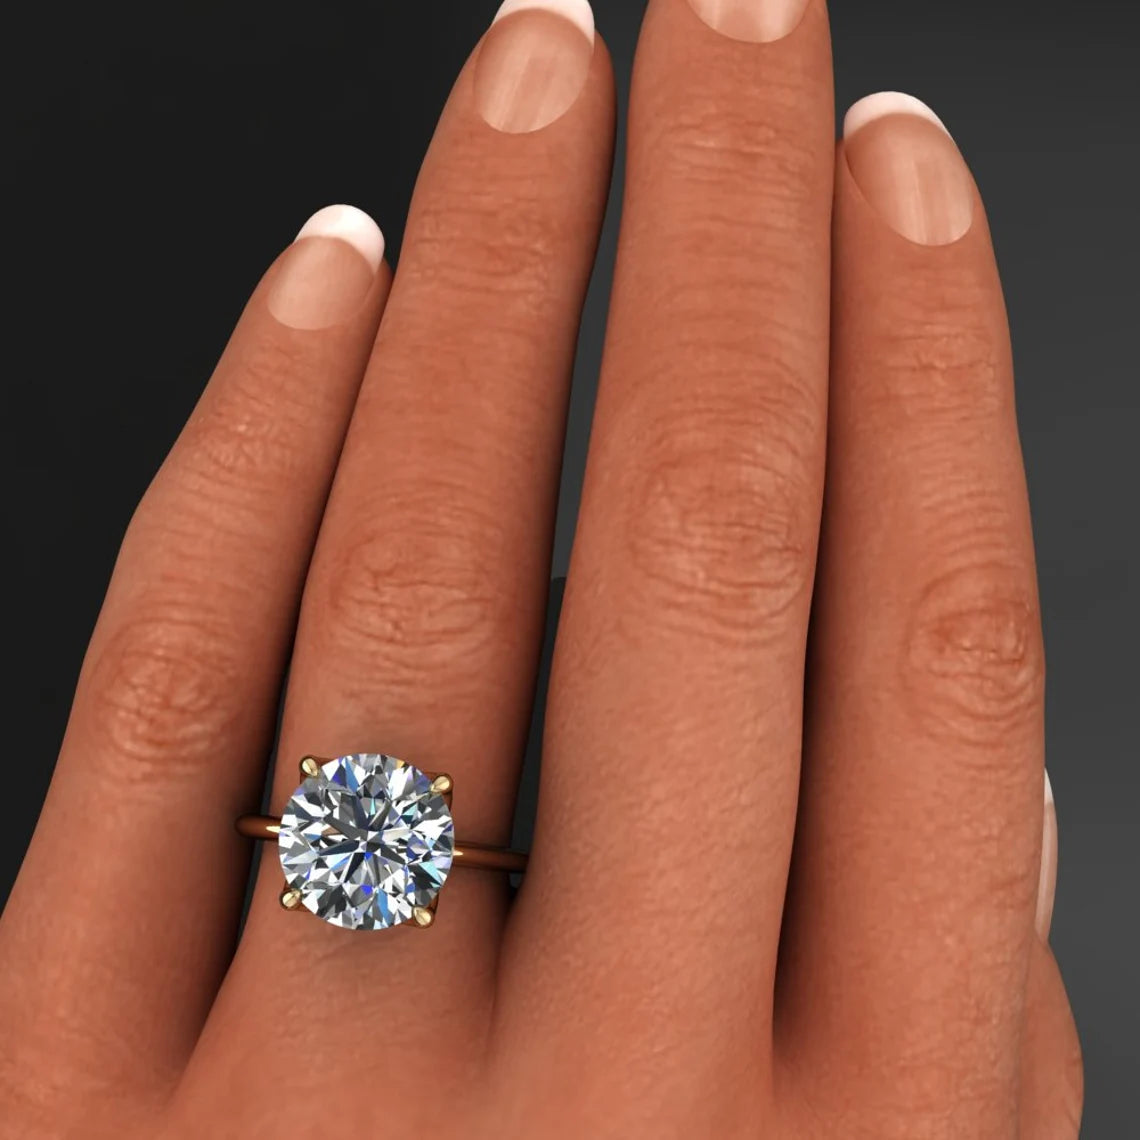 Dramatic 5-Carat Diamond Ring: For Love, Luxury, and Legacy - SuperJeweler